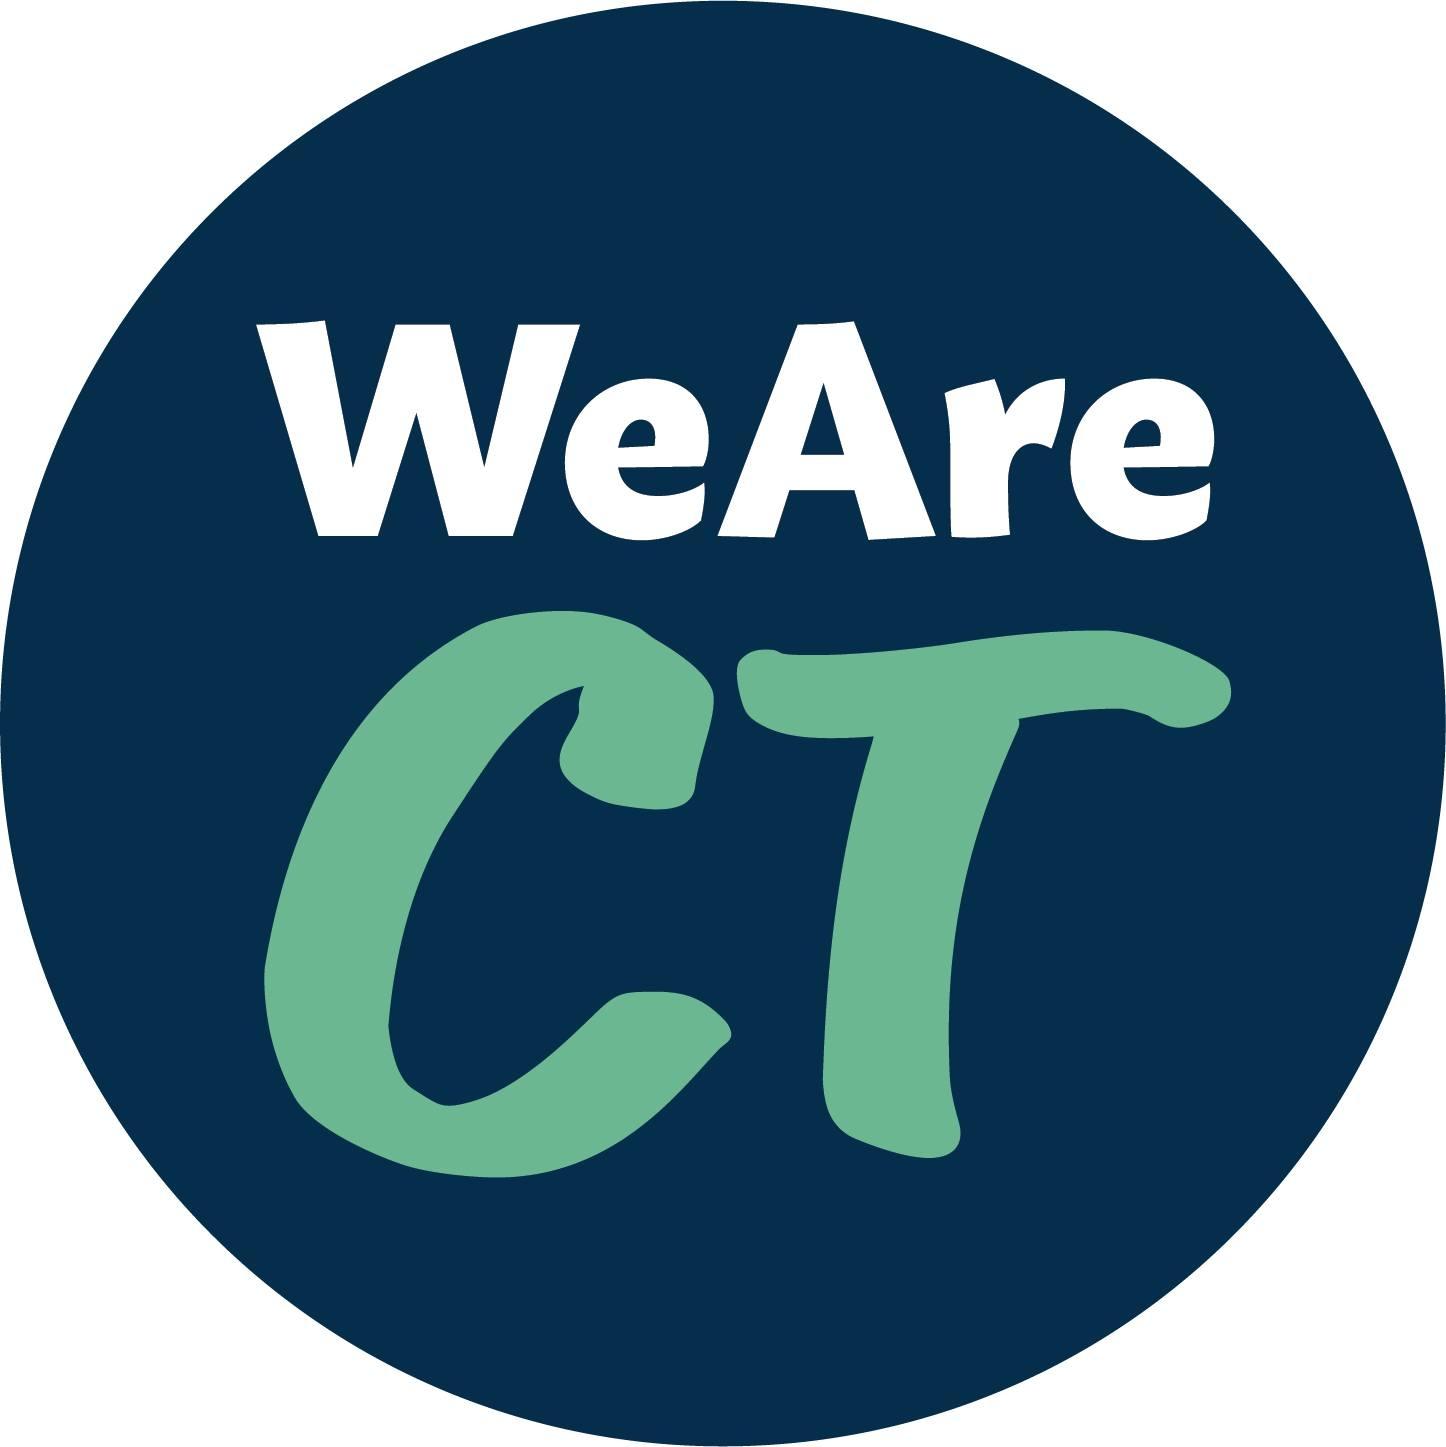 We Are CT